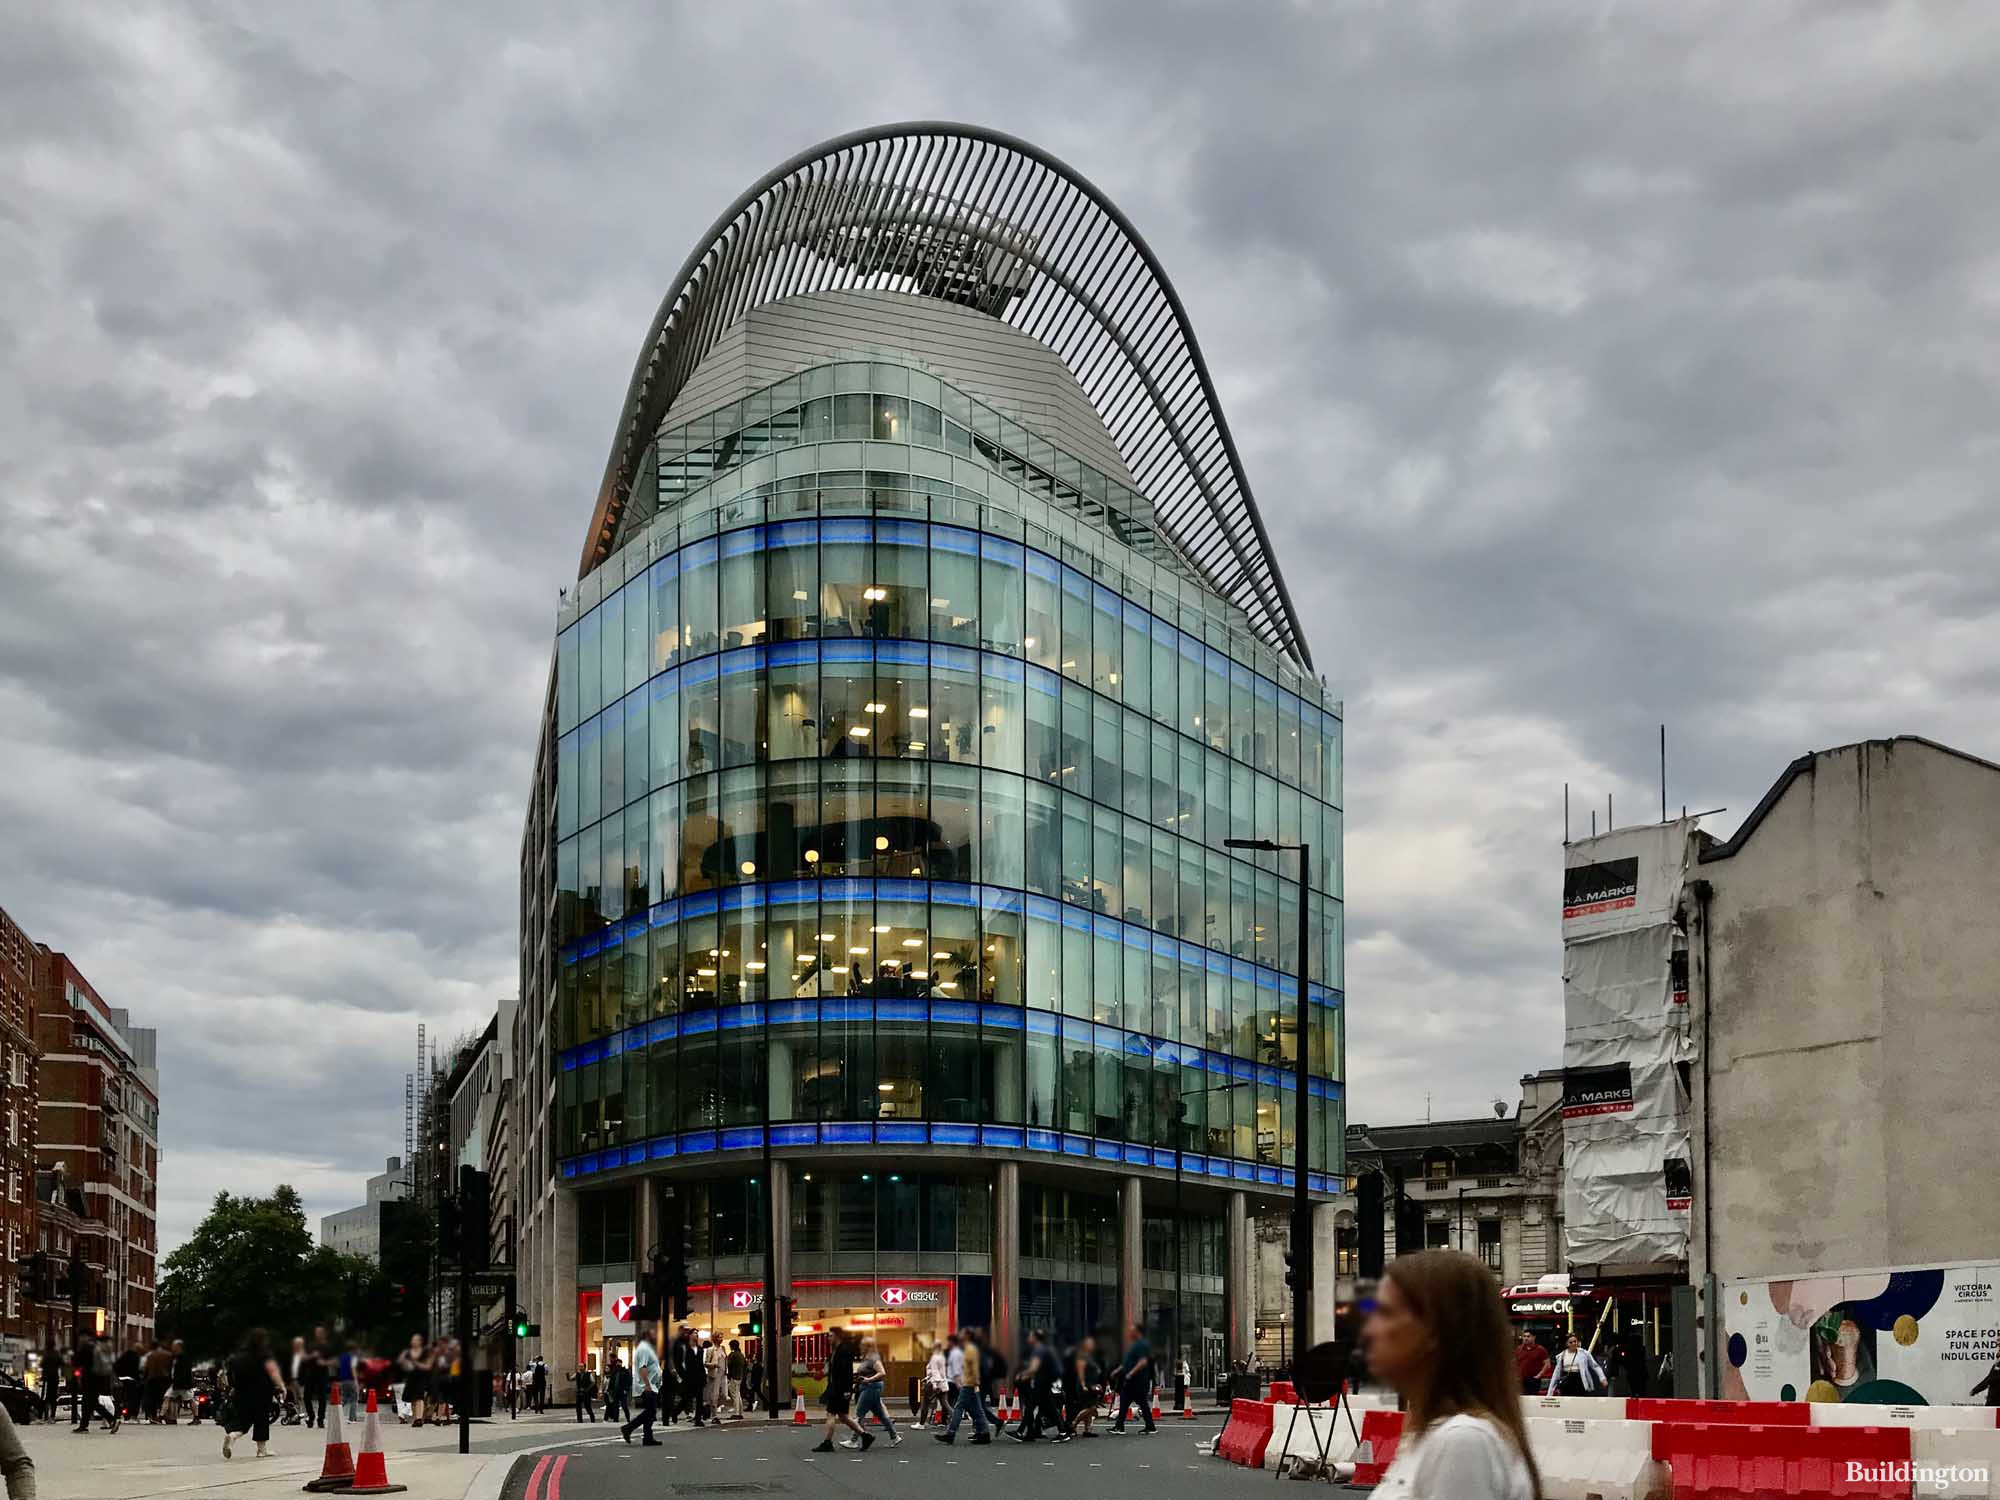 The Peak office building designed by Sheppard Robson at the junction of Victoria Street, Vauxhall Bridge Road and Wilton Road in London SW1.